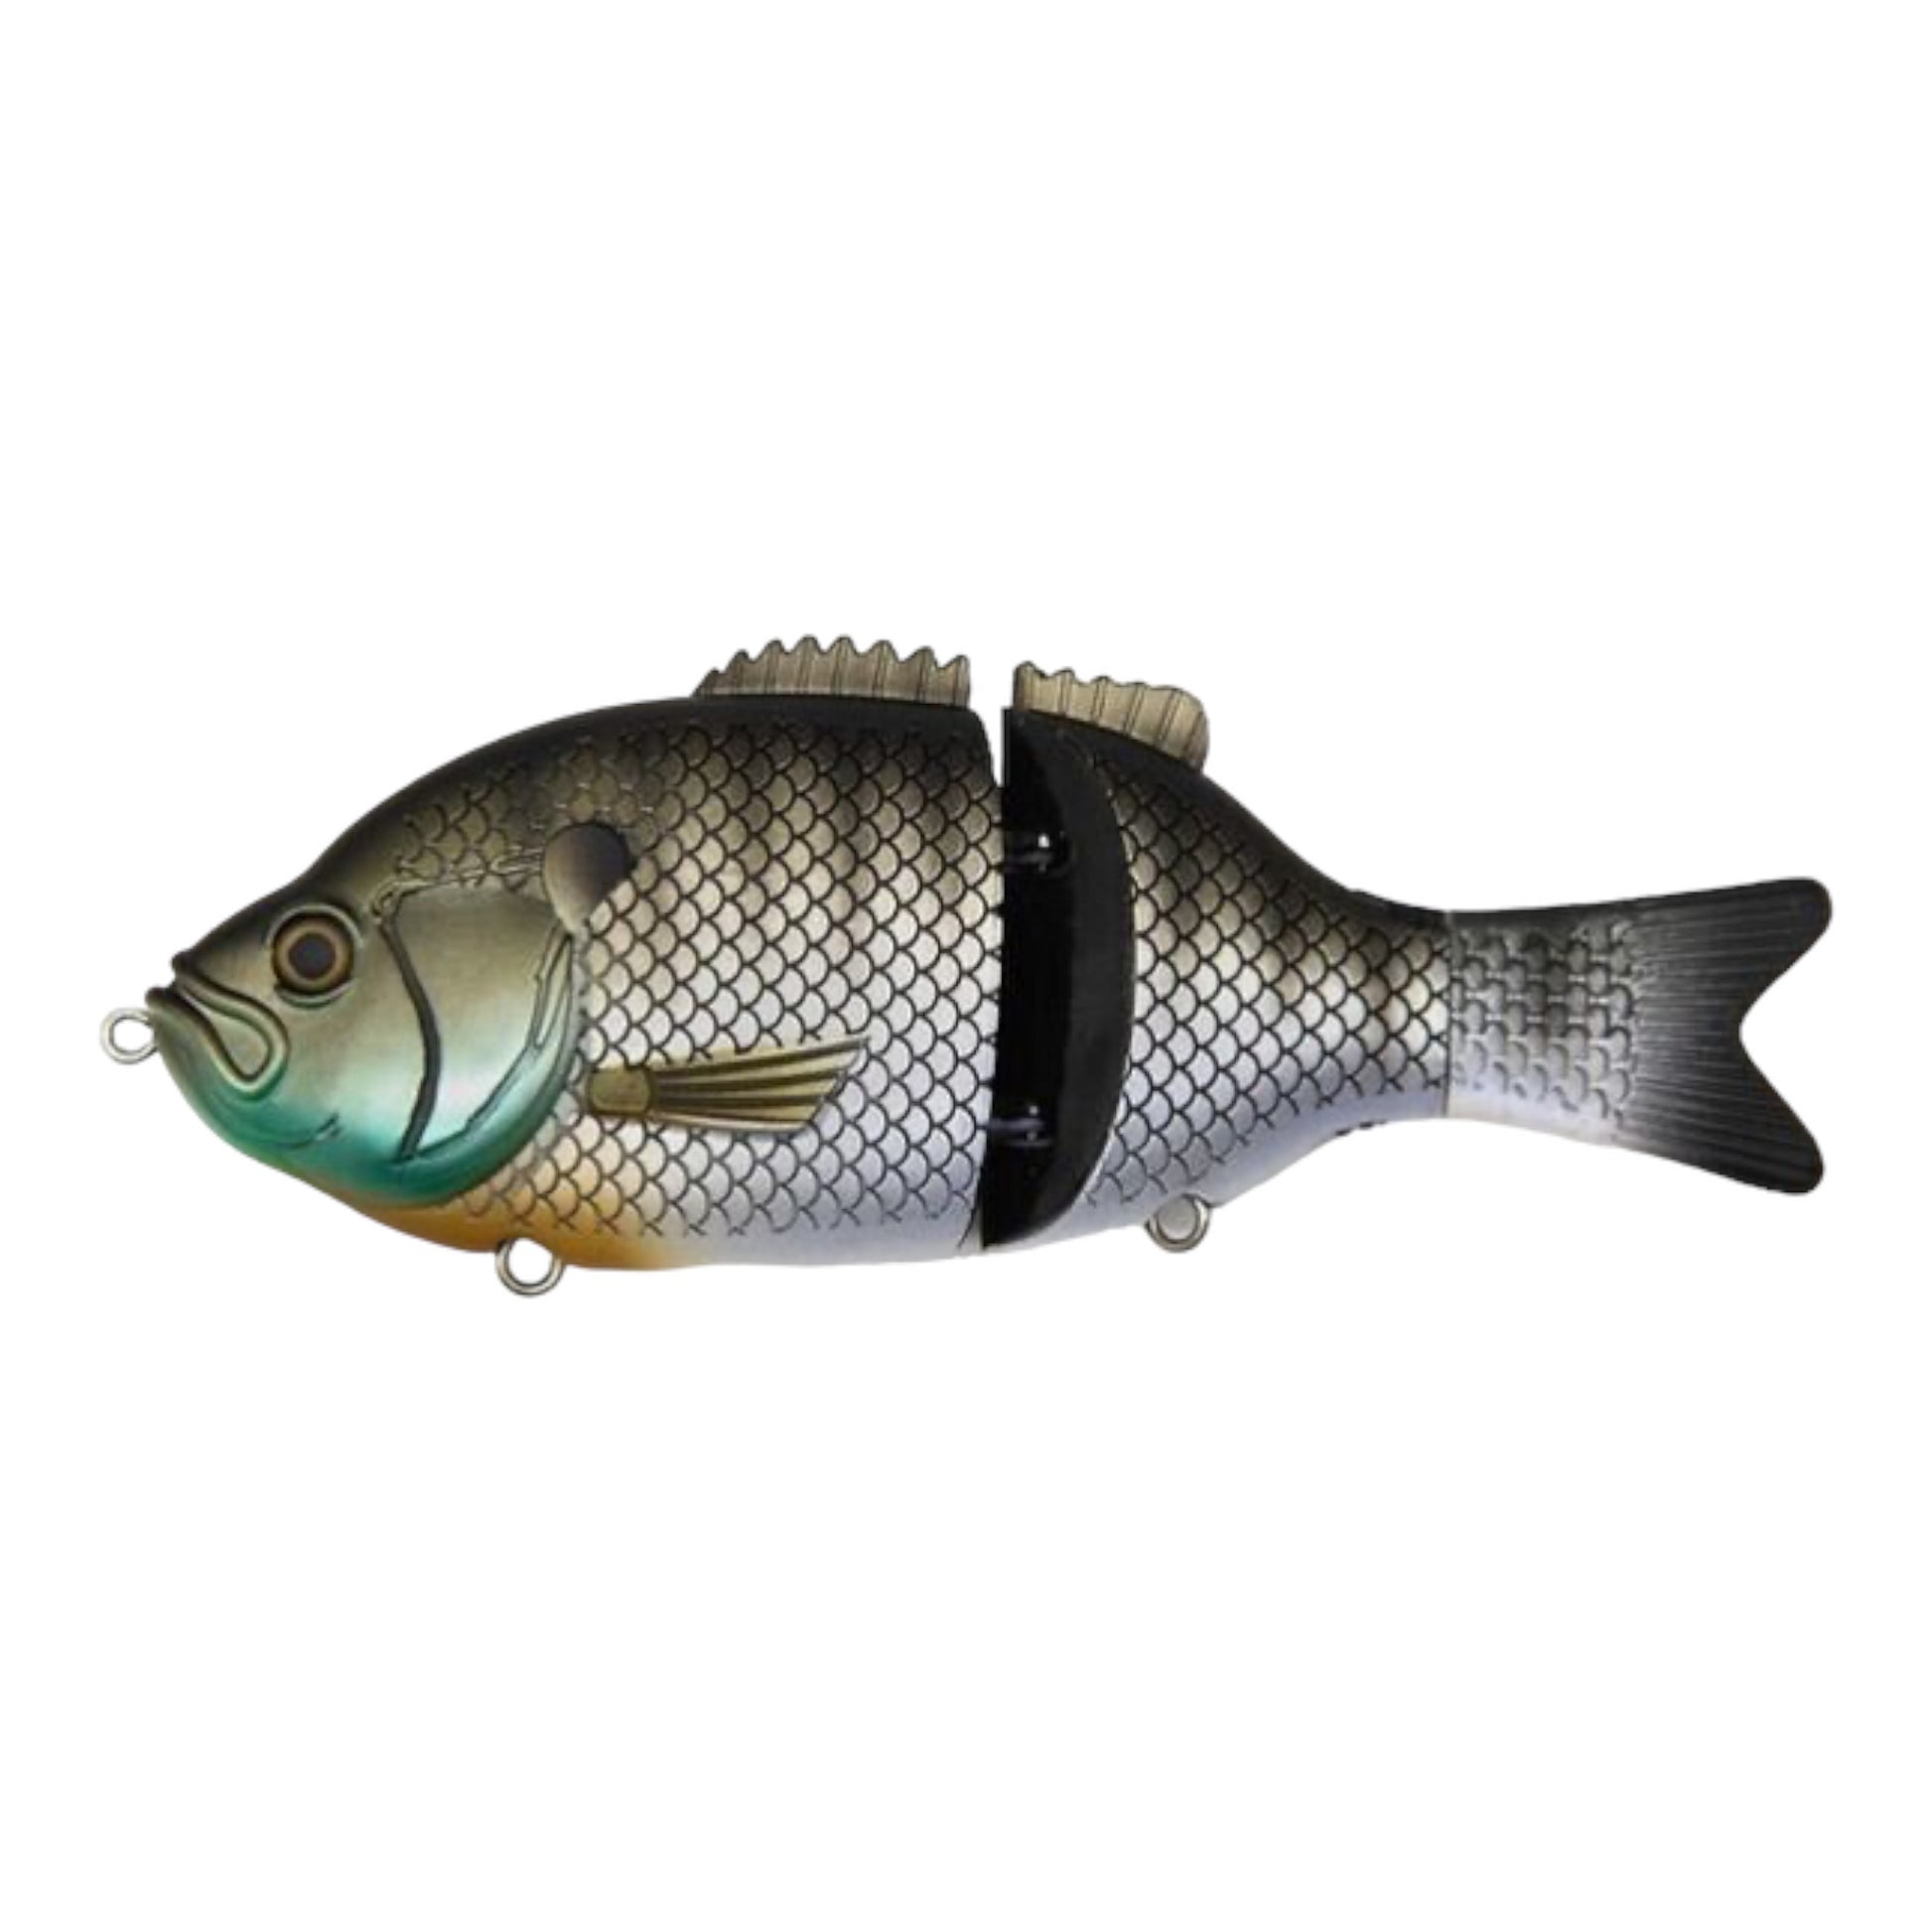 Dovesun Bluegill Swimbait, Soft Plastic Fishing Lures Artificial Fishing  Bait Free to Adjust The Buoyancy and Counterweight for Trout Pike Bass